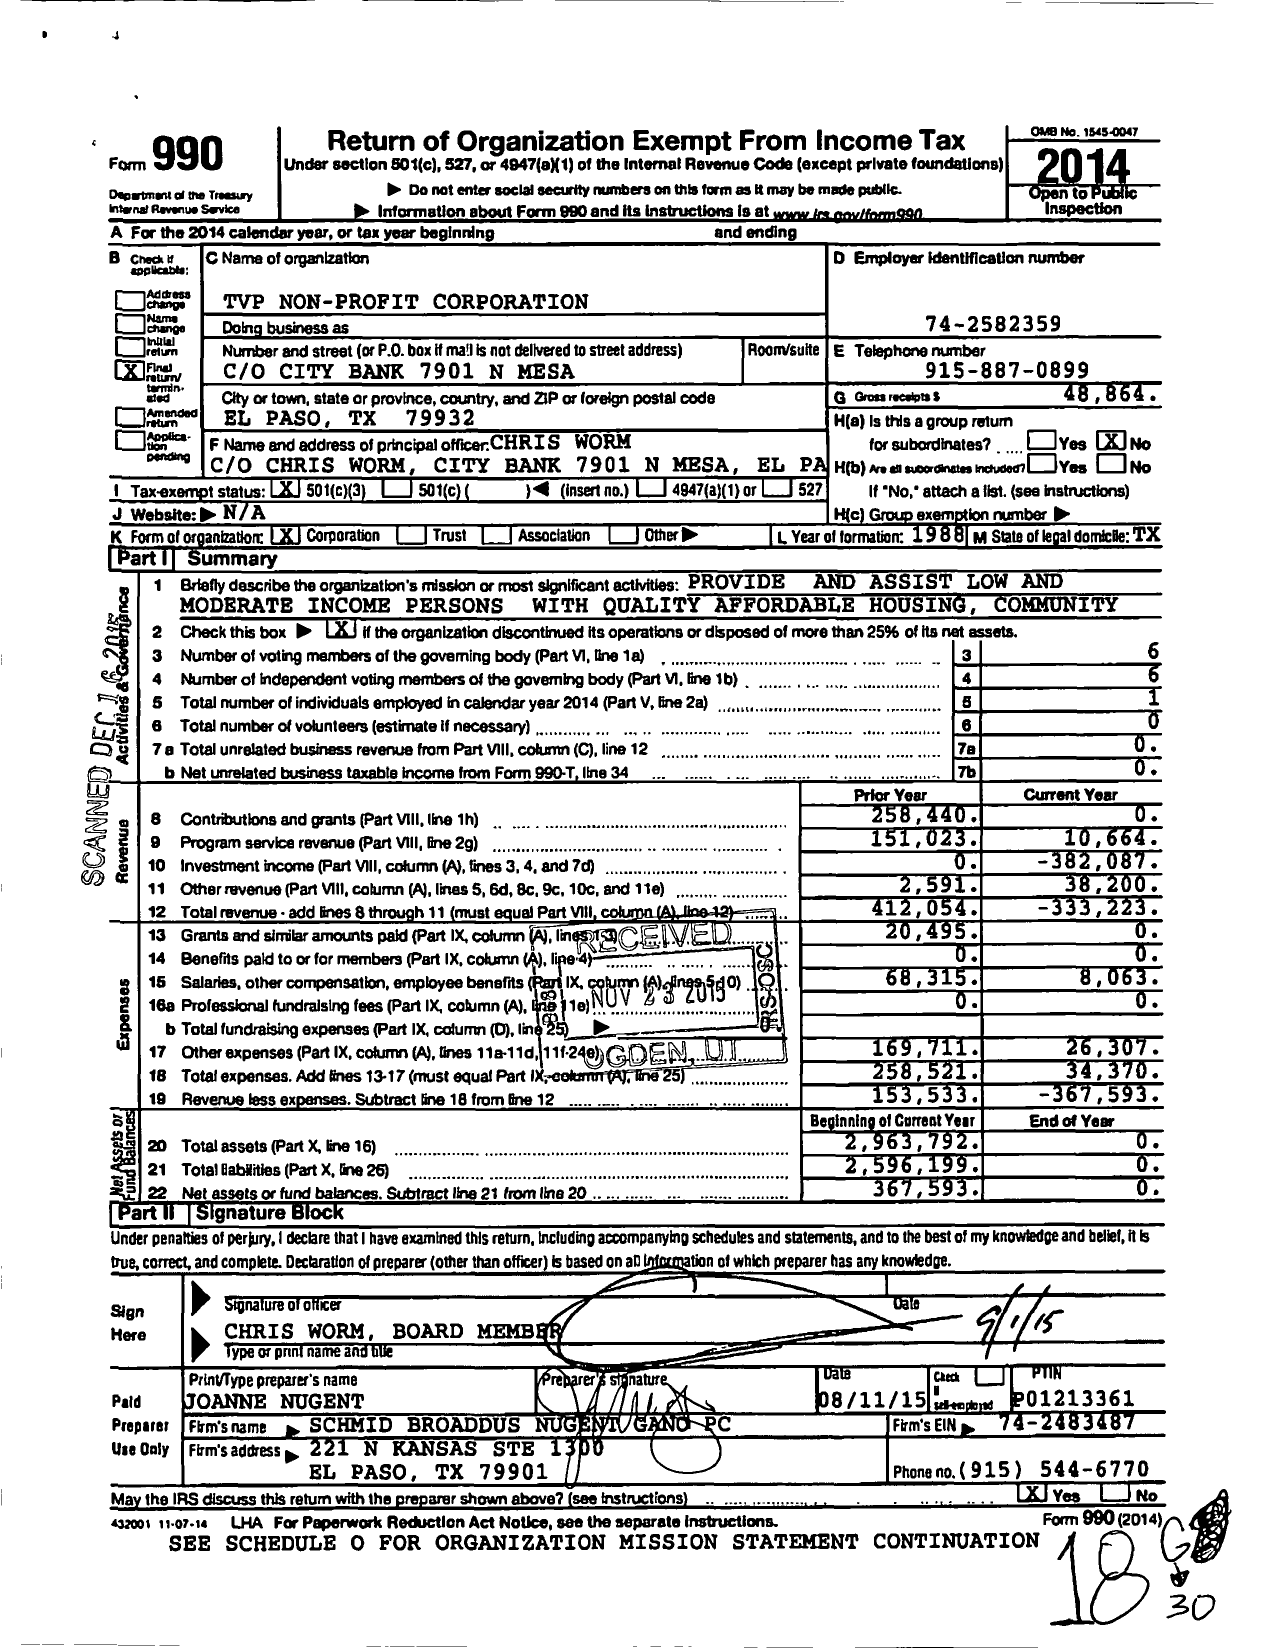 Image of first page of 2014 Form 990 for TVP Non-Profit Corporation